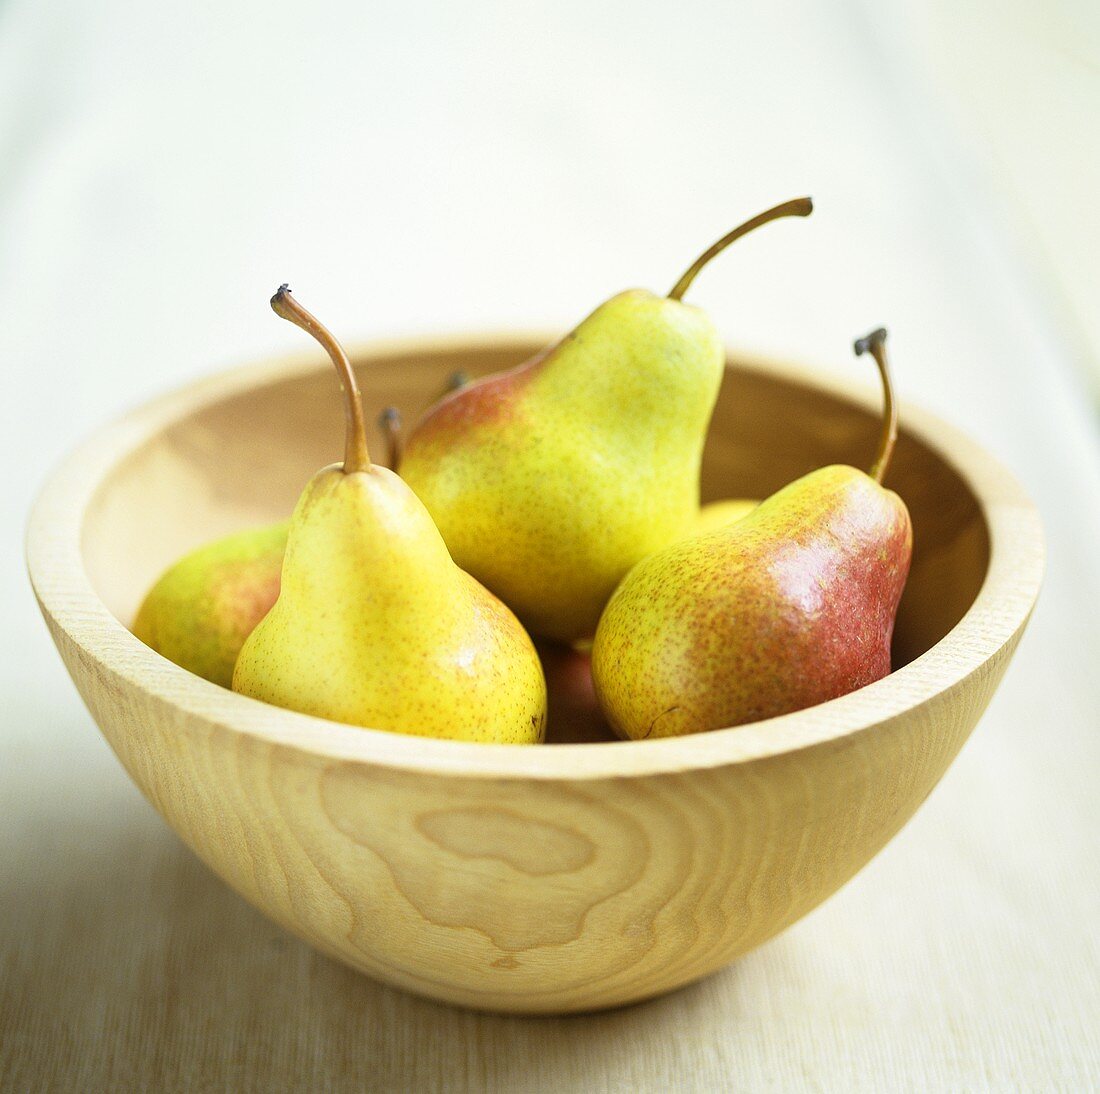 Several pears in a wooden bowl